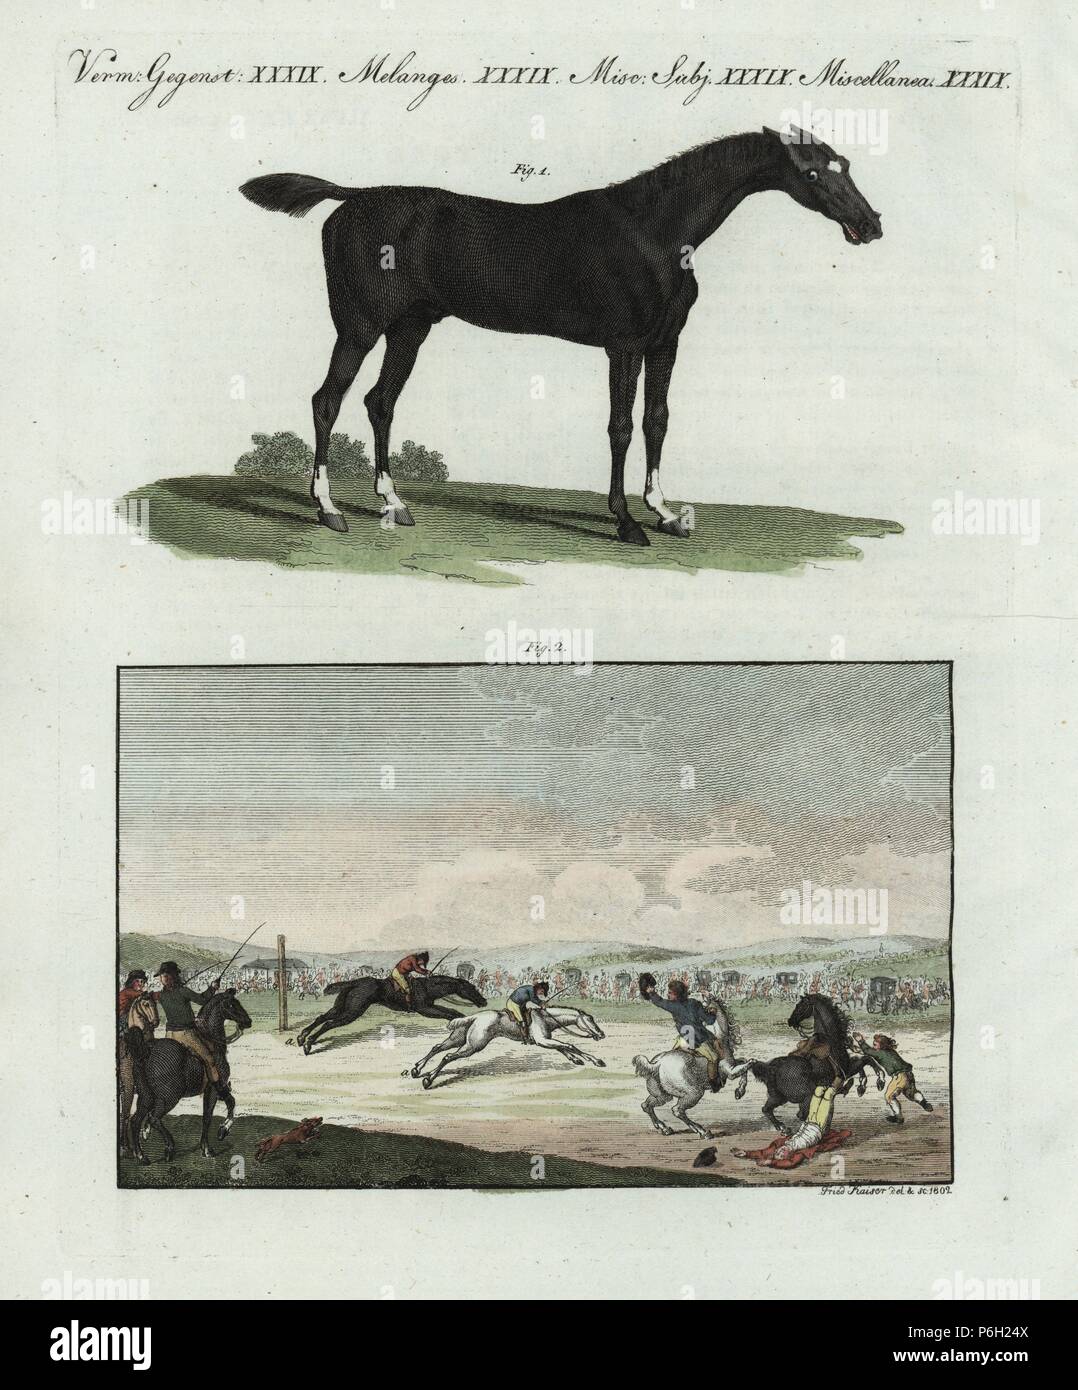 English racing horse or courser 1, and scene at an English horse race track 2. Handcoloured copperplate engraving after Friedrich Kaiser from Friedrich Johann Bertuch's Bilderbuch fur Kinder (Picture Book for Children), Weimar, 1802. Stock Photo